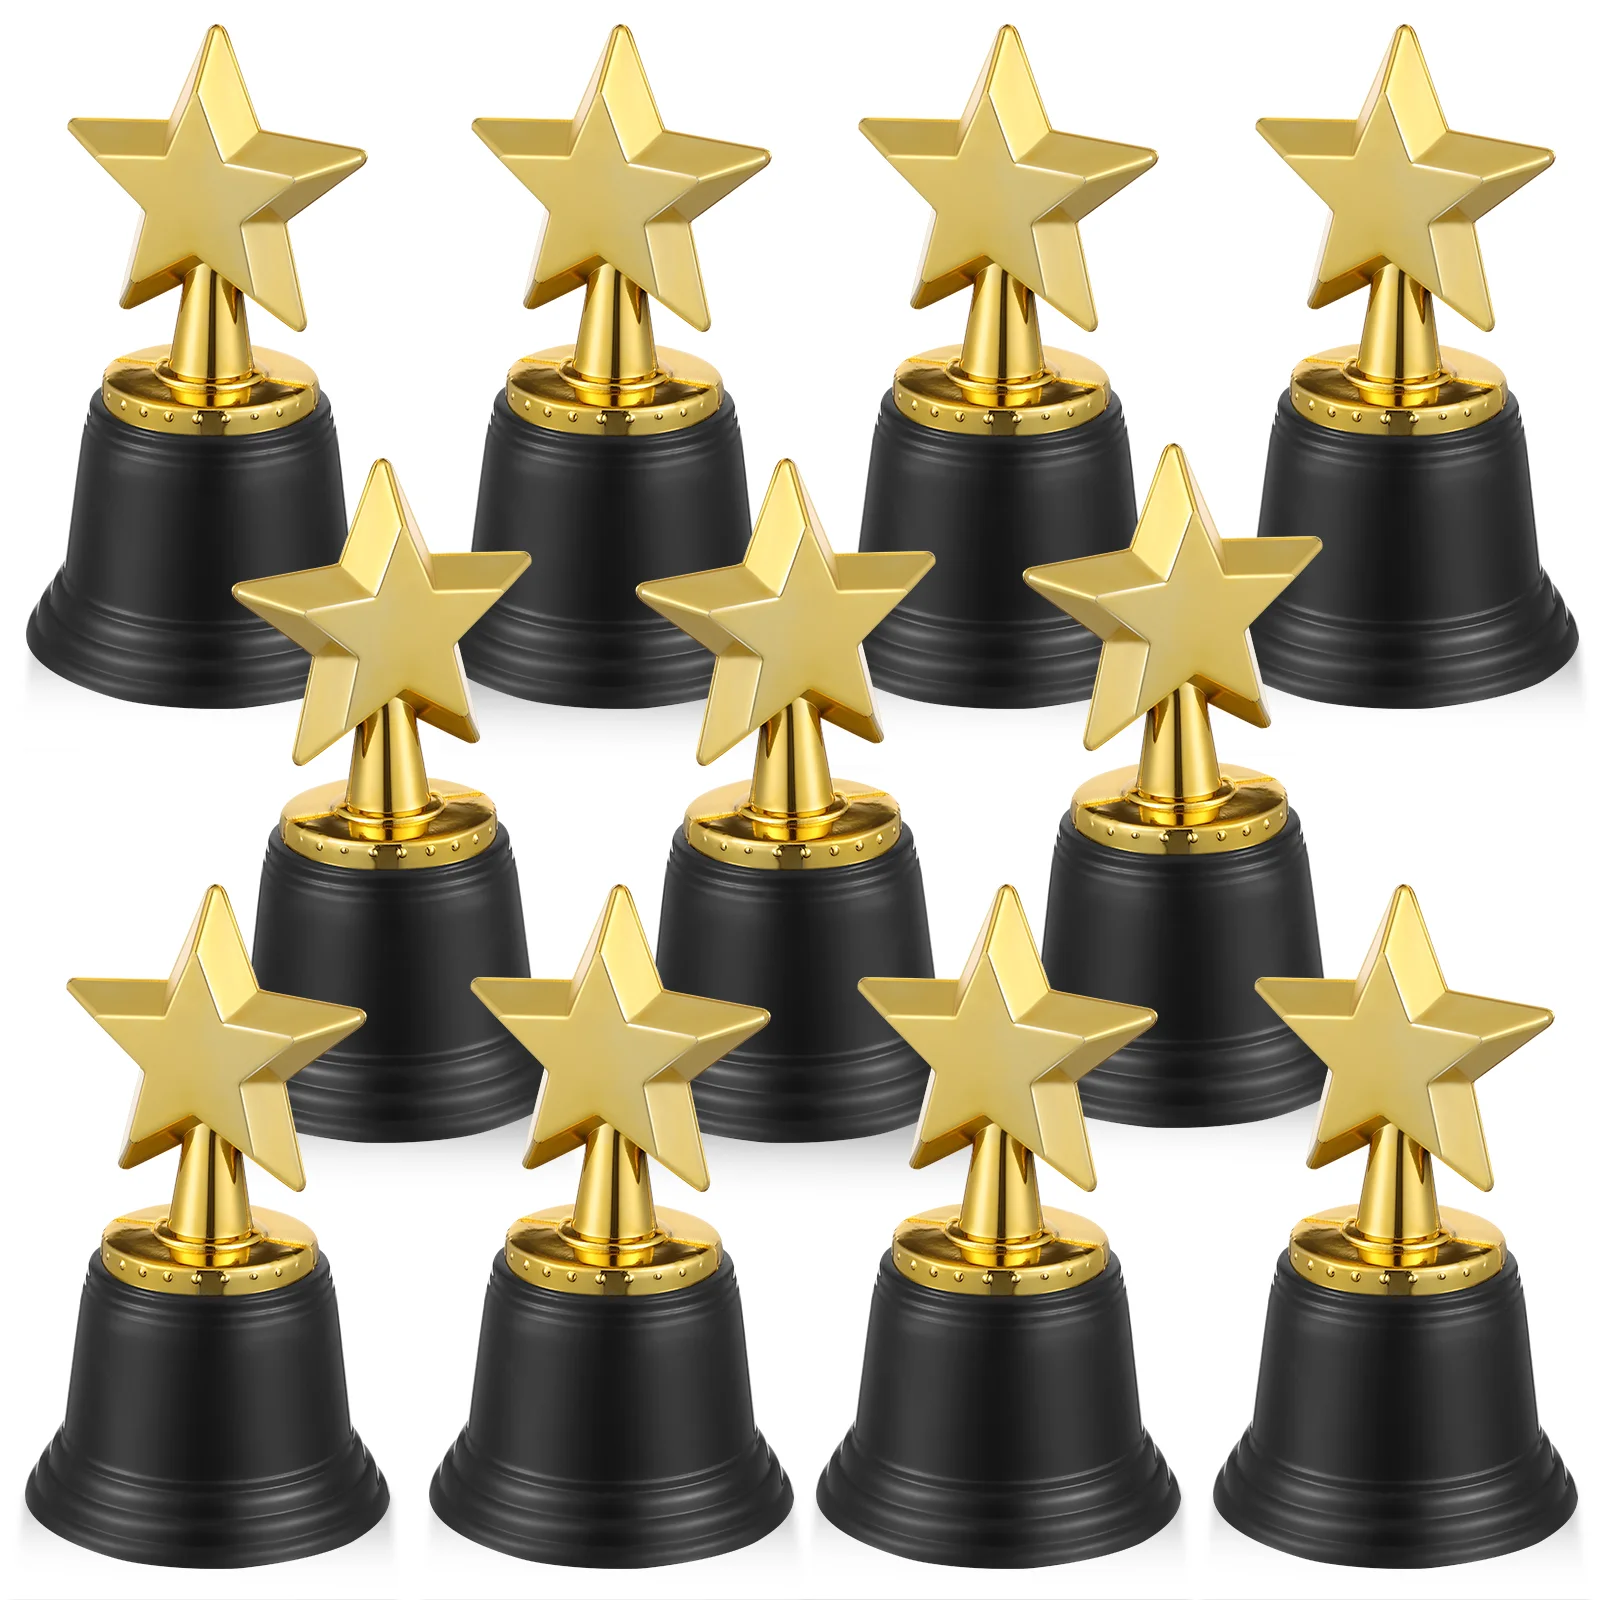 

20 Pcs Trophy Models Baseball Toy Race Award Baseball Medals Party Kids Five-point Star Plaque